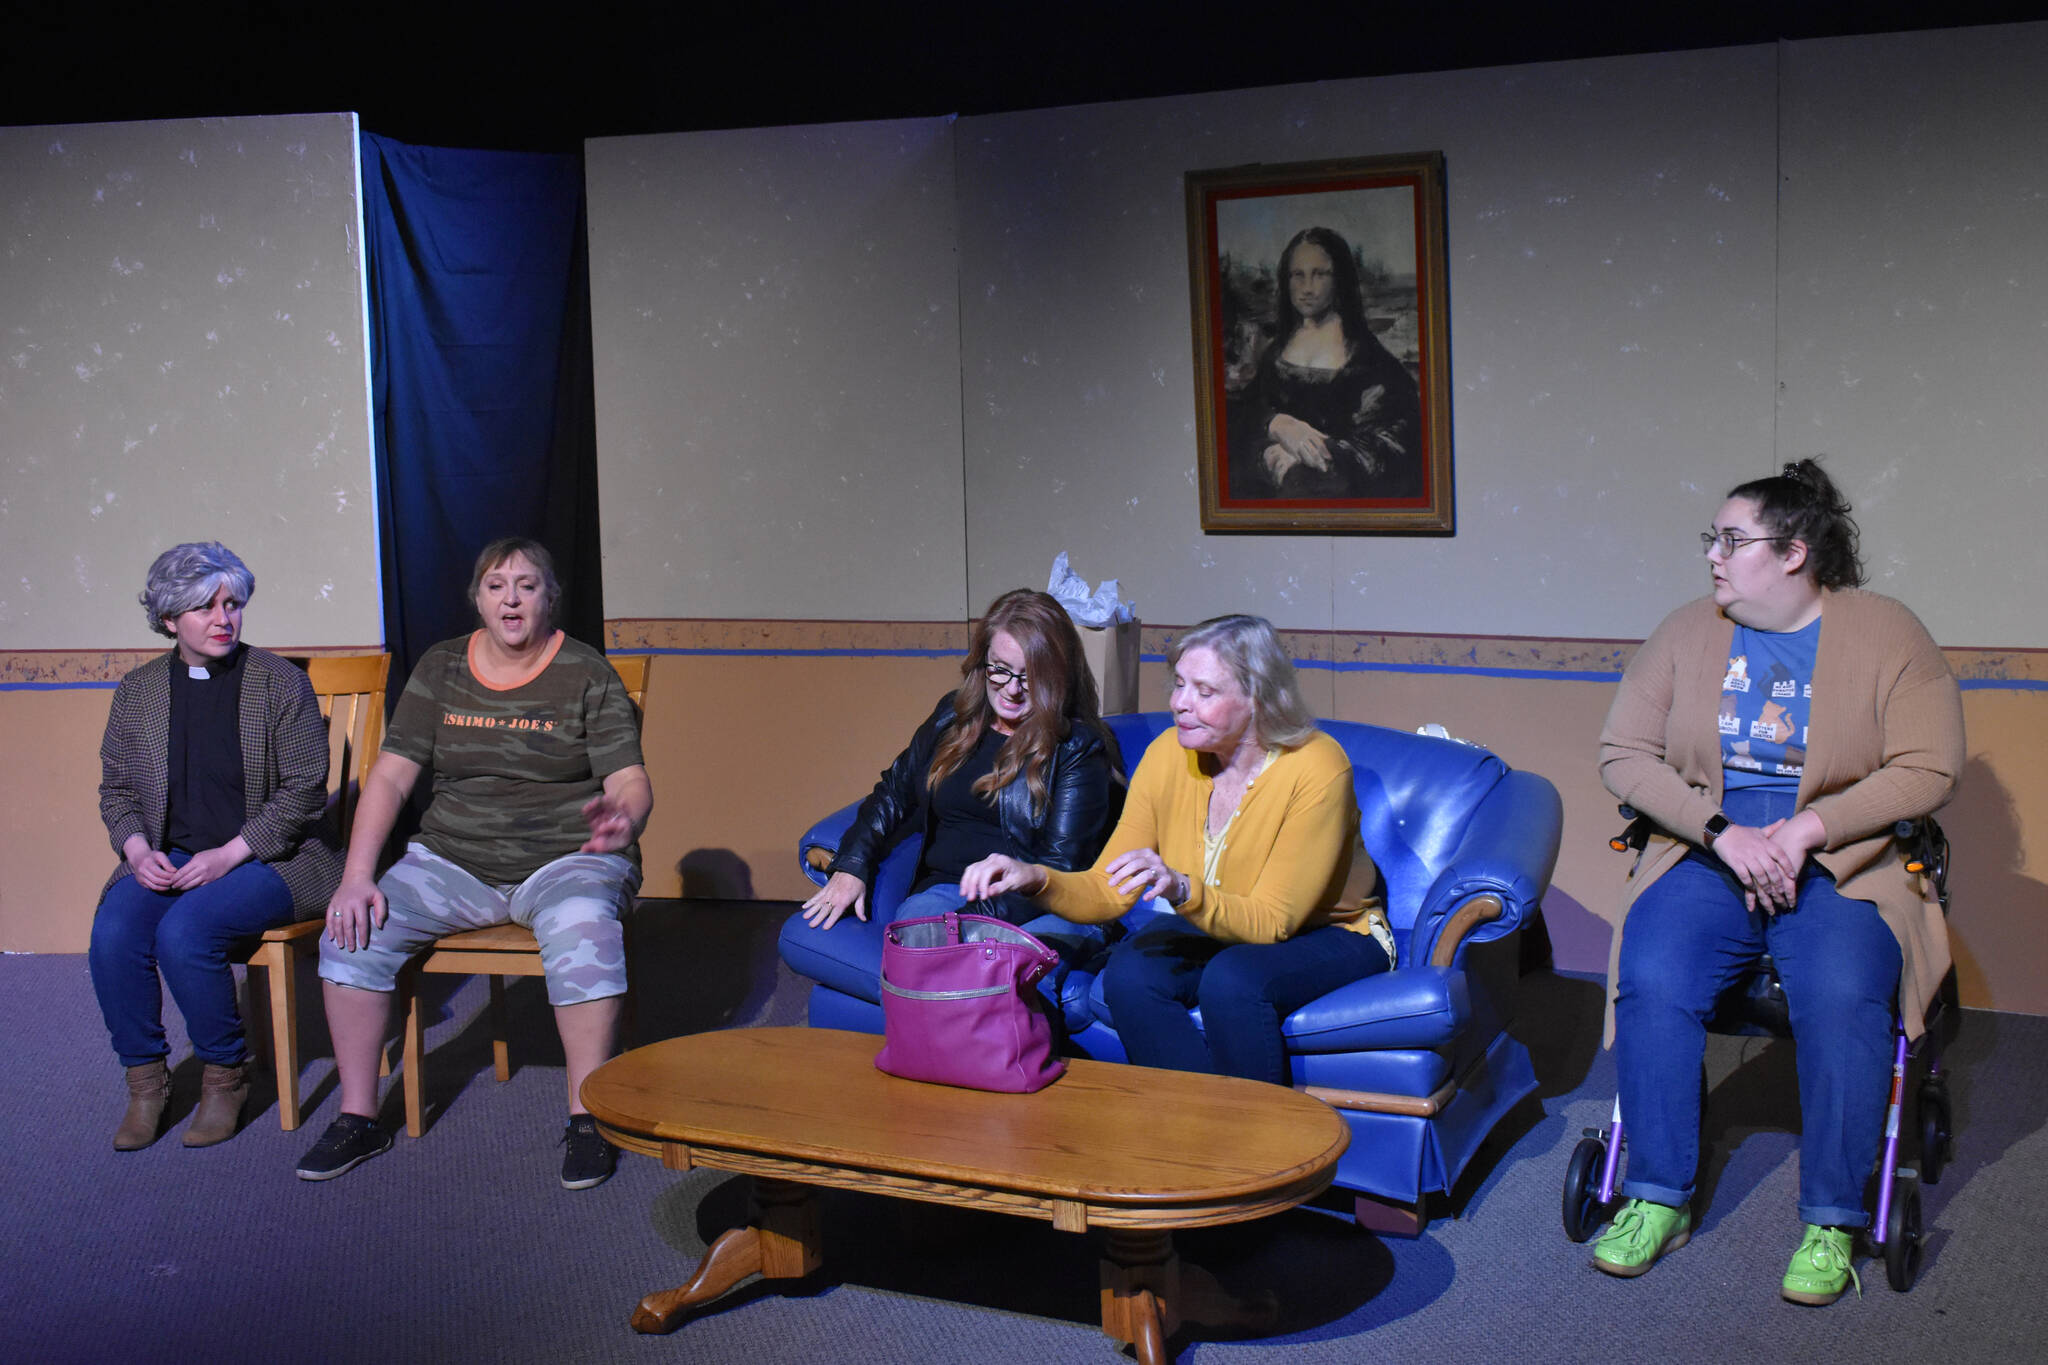 Lacey Jane Brewster, Donna Shirnberg, Tracie Sanborn,Terri Zopf-Schoessler and Nikki Stein act during a rehearsal of “Menopause Made Me Do It” on Tuesday, Sept. 13, 2022, in Soldotna, Alaska. (Jake Dye/Peninsula Clarion)